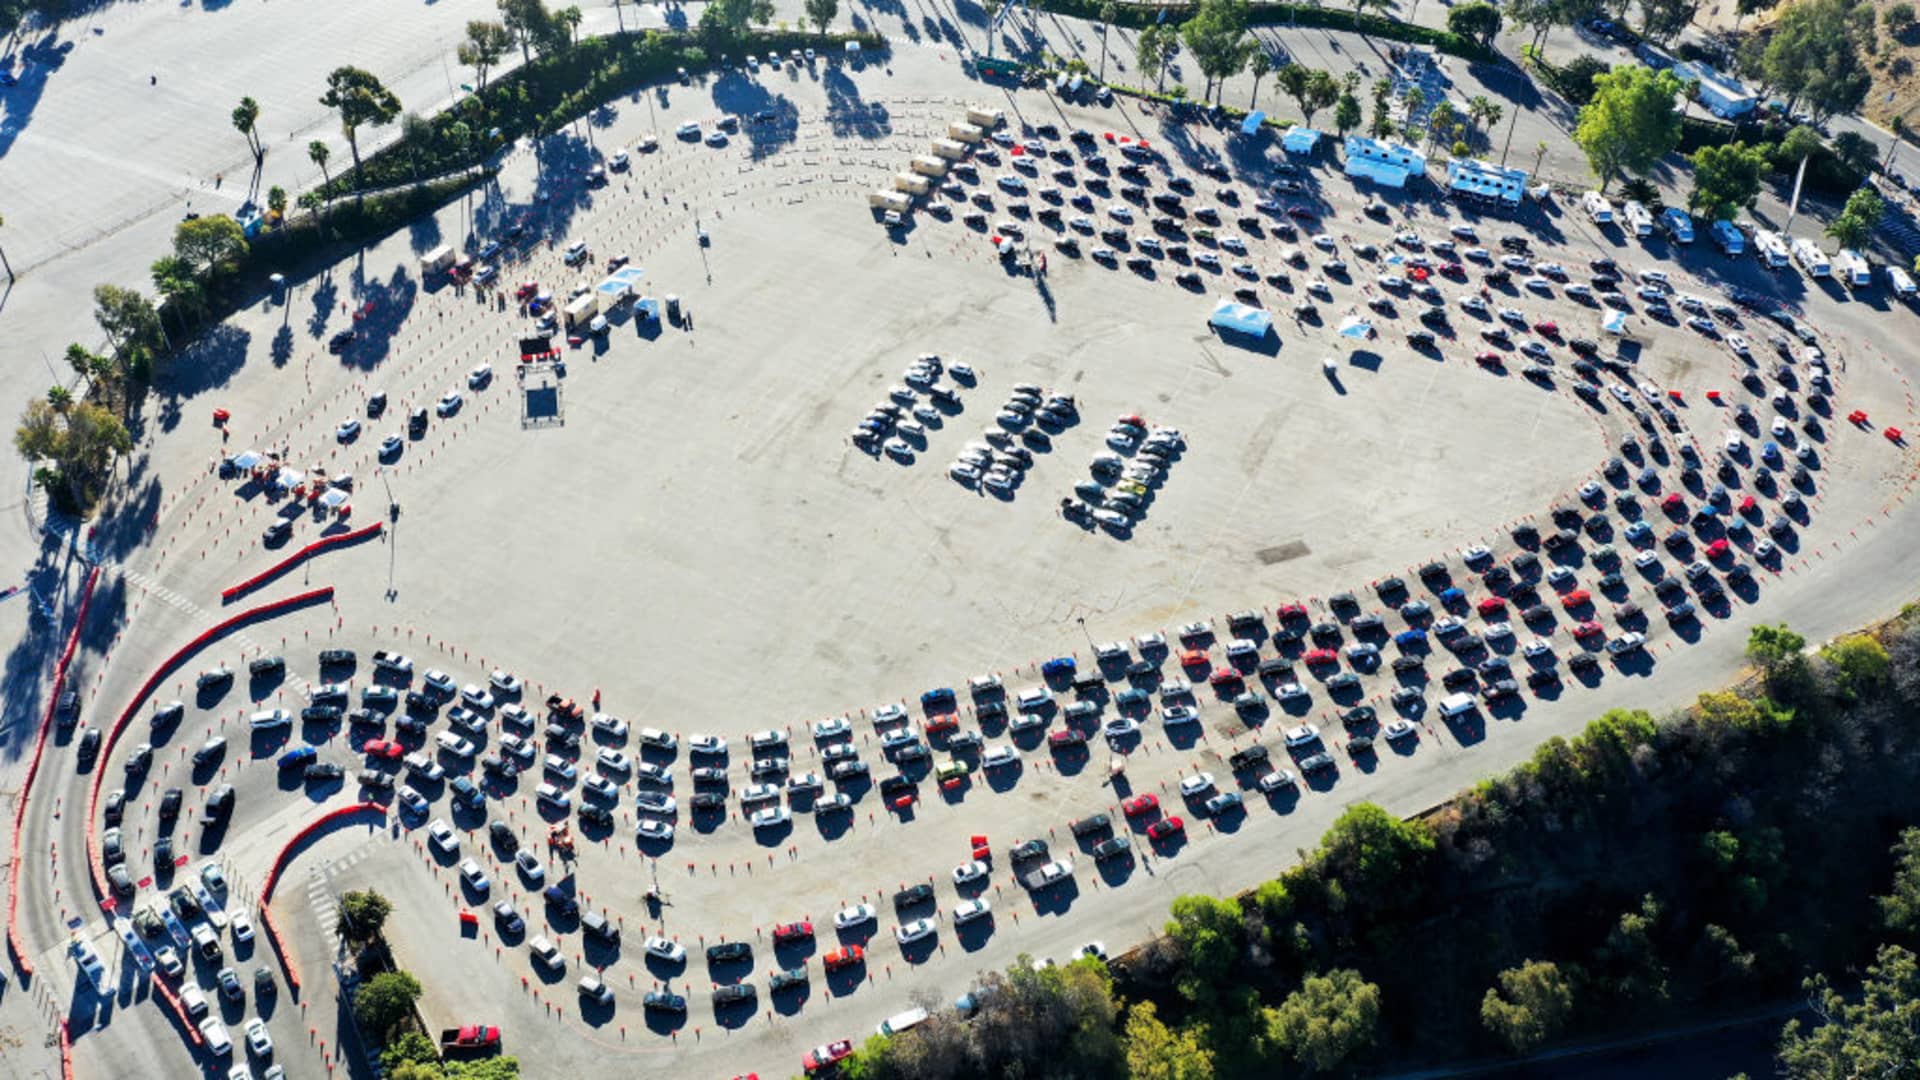 In an aerial view from a drone, cars are lined up at Dodger Stadium for COVID-19 testing on the Monday after Thanksgiving weekend on November 30, 2020 in Los Angeles, California.